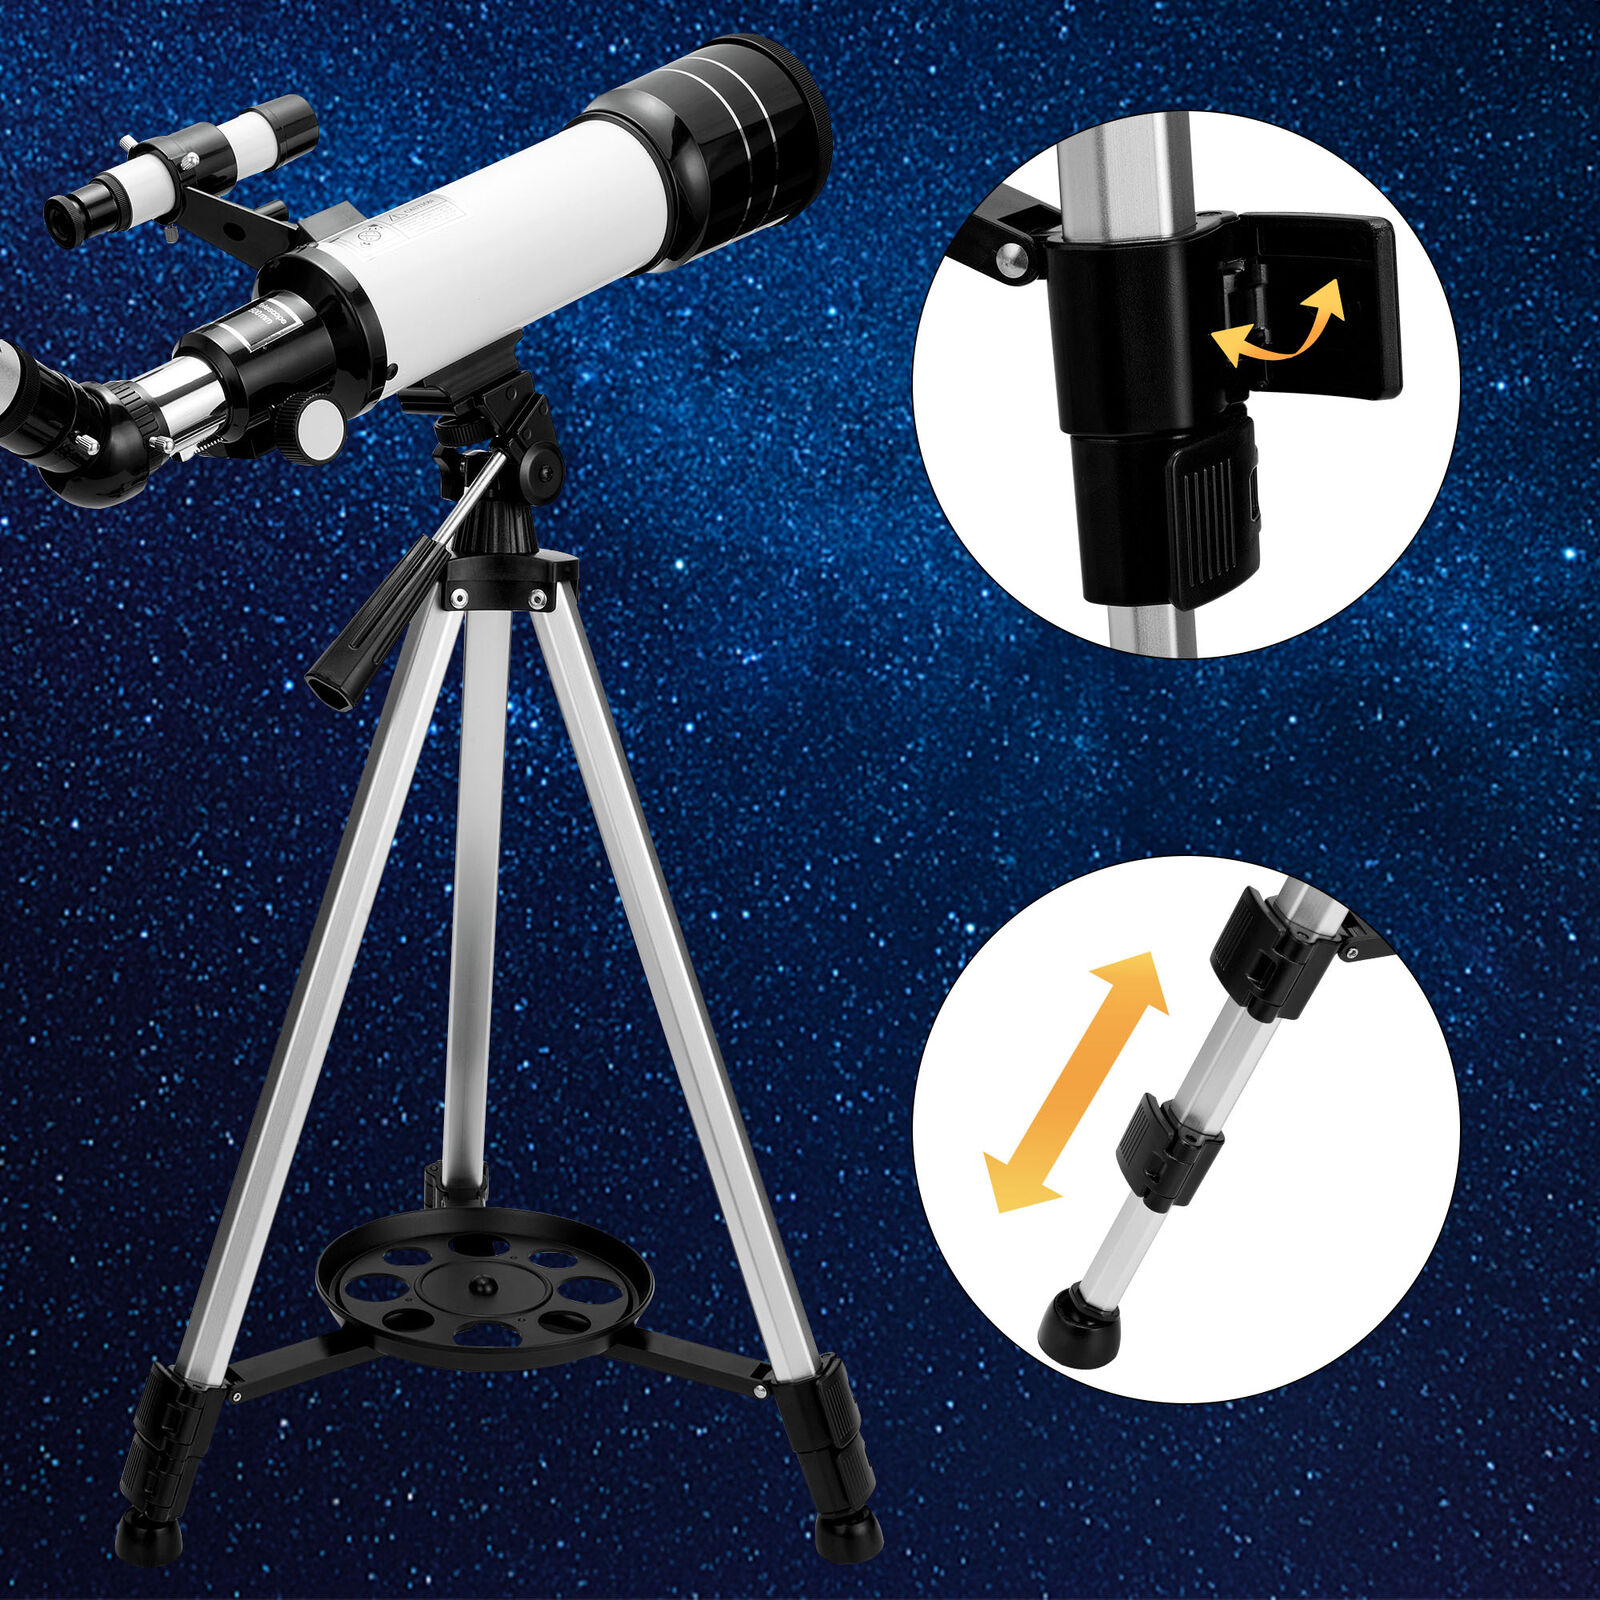 70mm Astronomical Telescope 3X with Phone Adapter Barlow Lens for Kids Gift